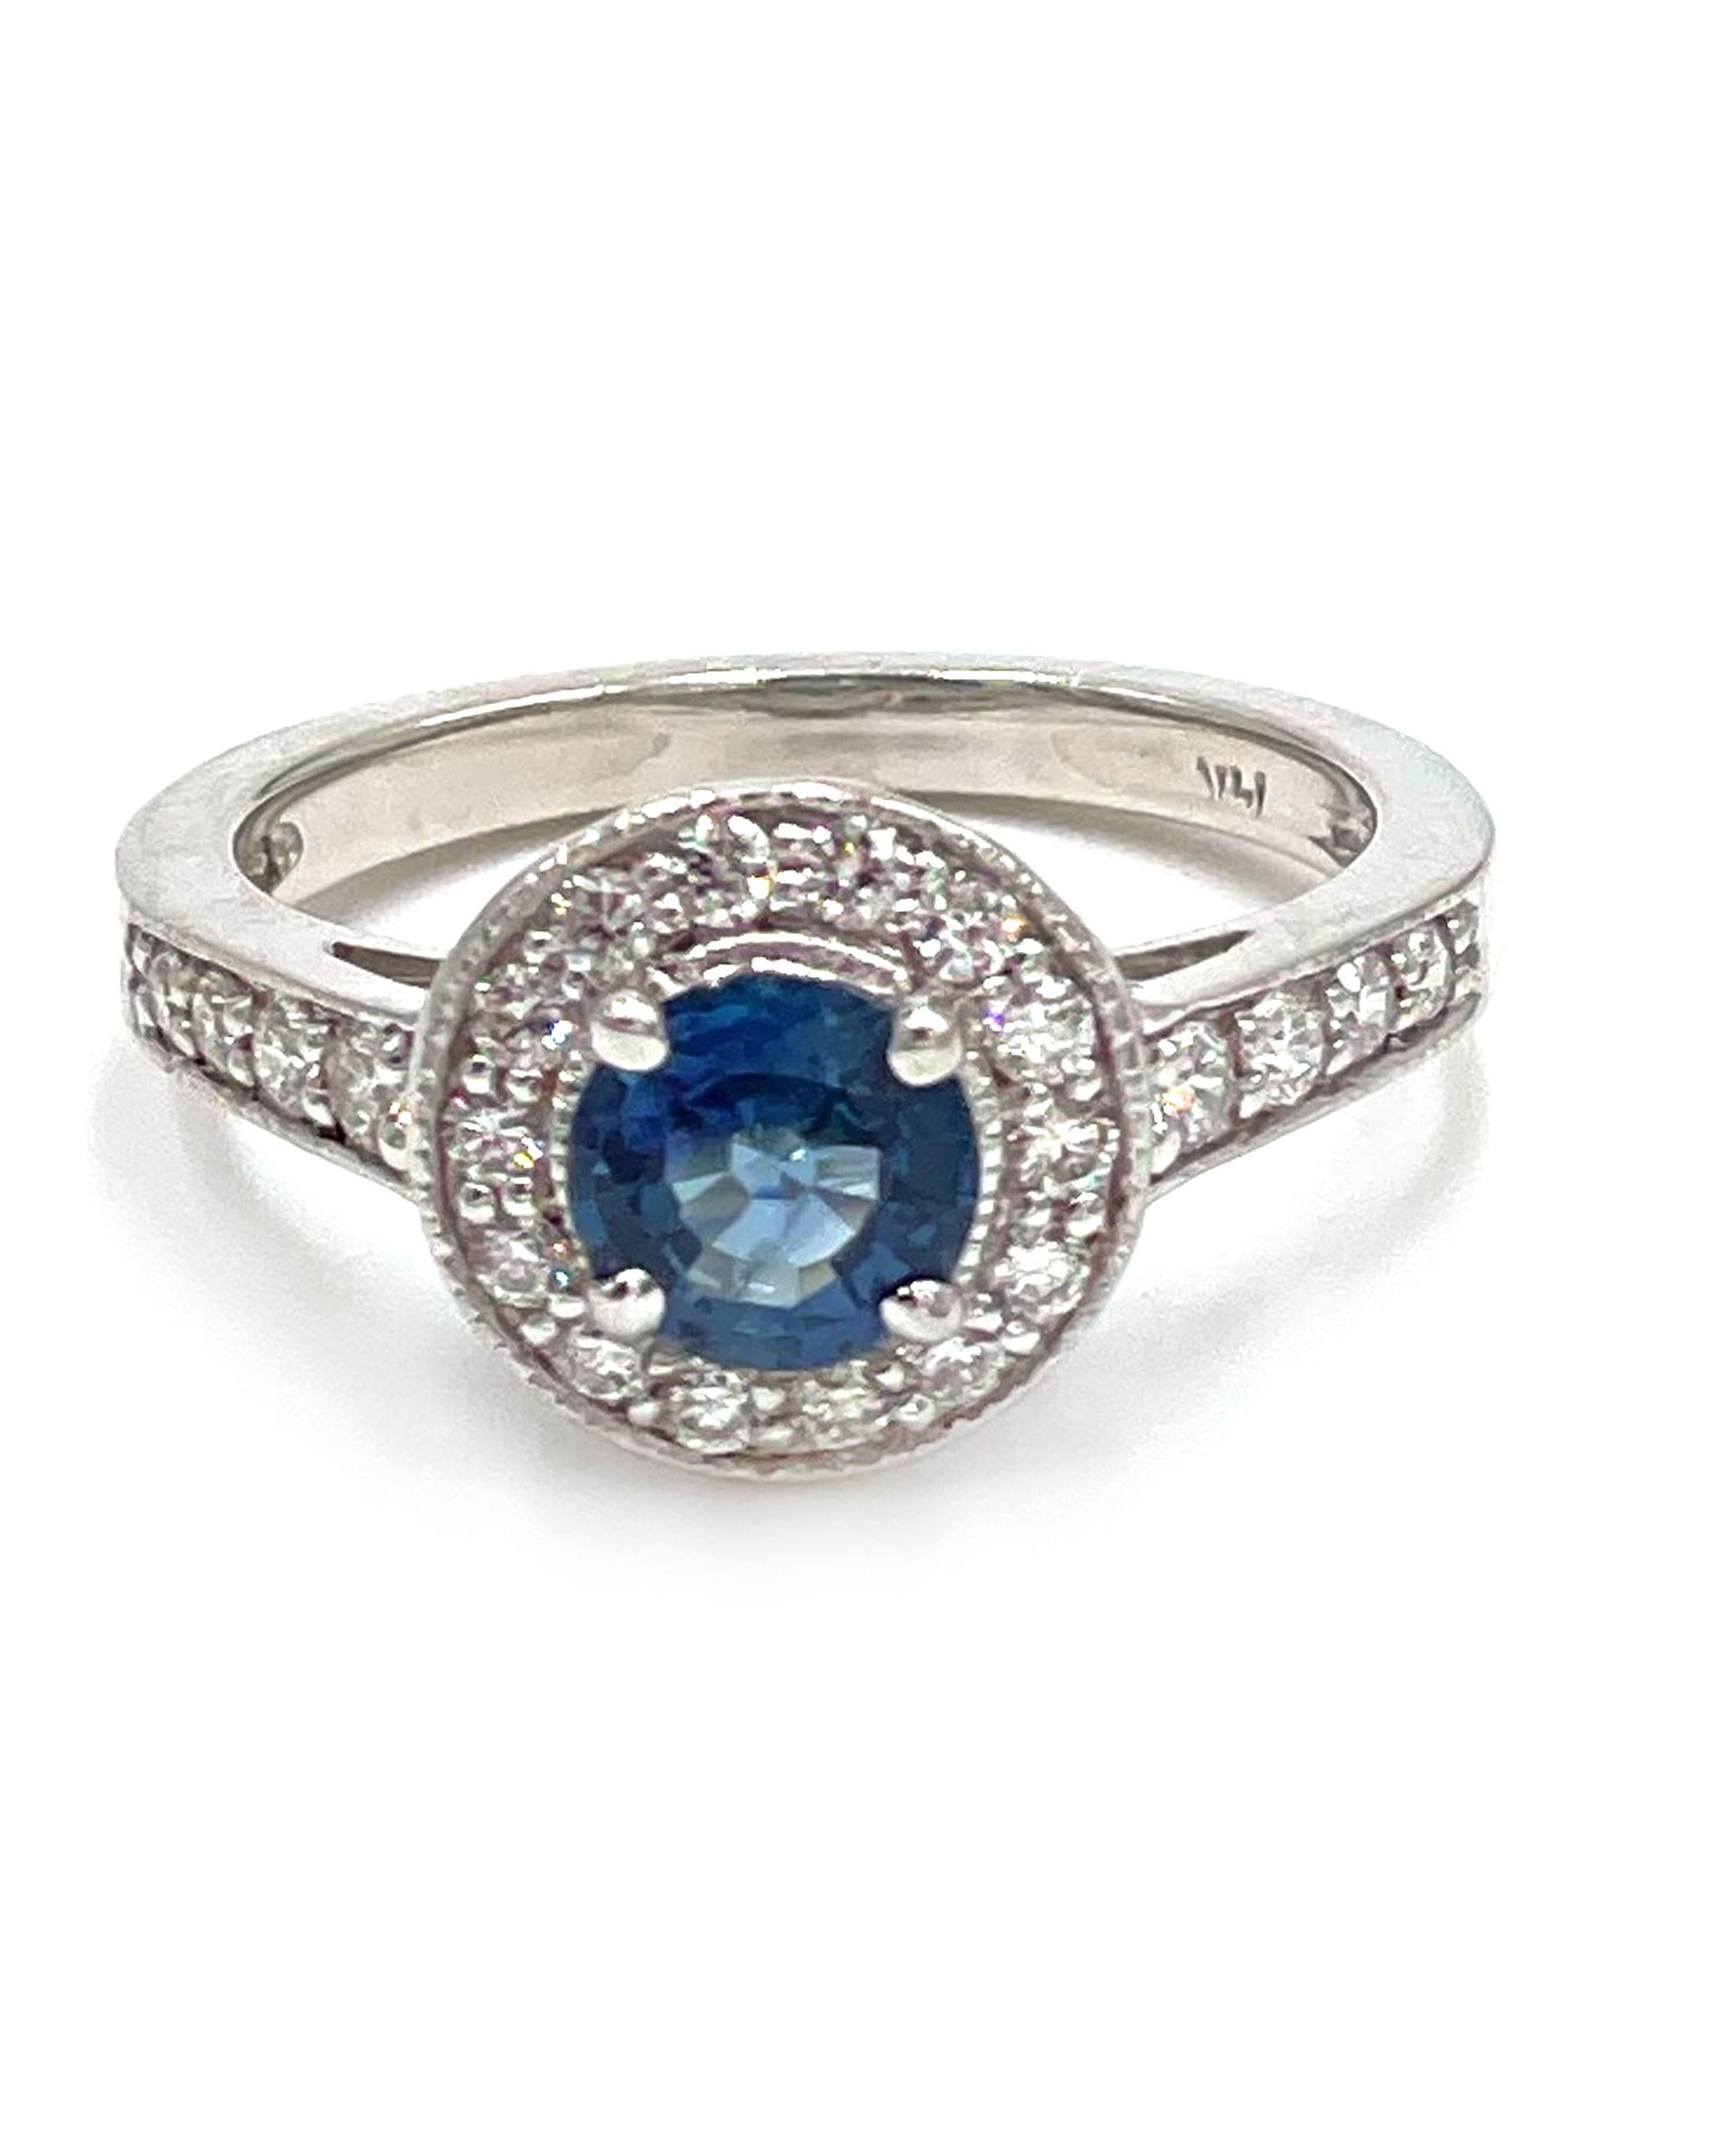 14K white gold halo ring featuring one round faceted blue sapphire 0.90 carats.  The ring is also furnished with 22 round brilliant-cut diamonds 0.45 carats total weight and accented with miligrain detailing.

* Diamonds are G color, SI1 clarity.
*